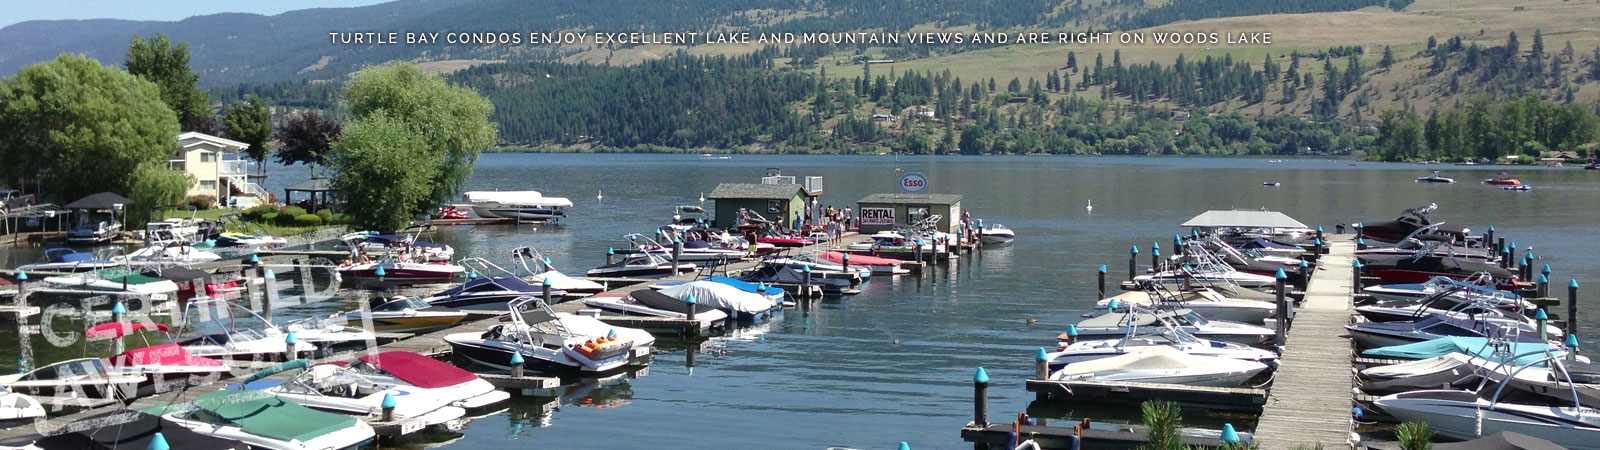 View of Boat Rentals on Woods Lake